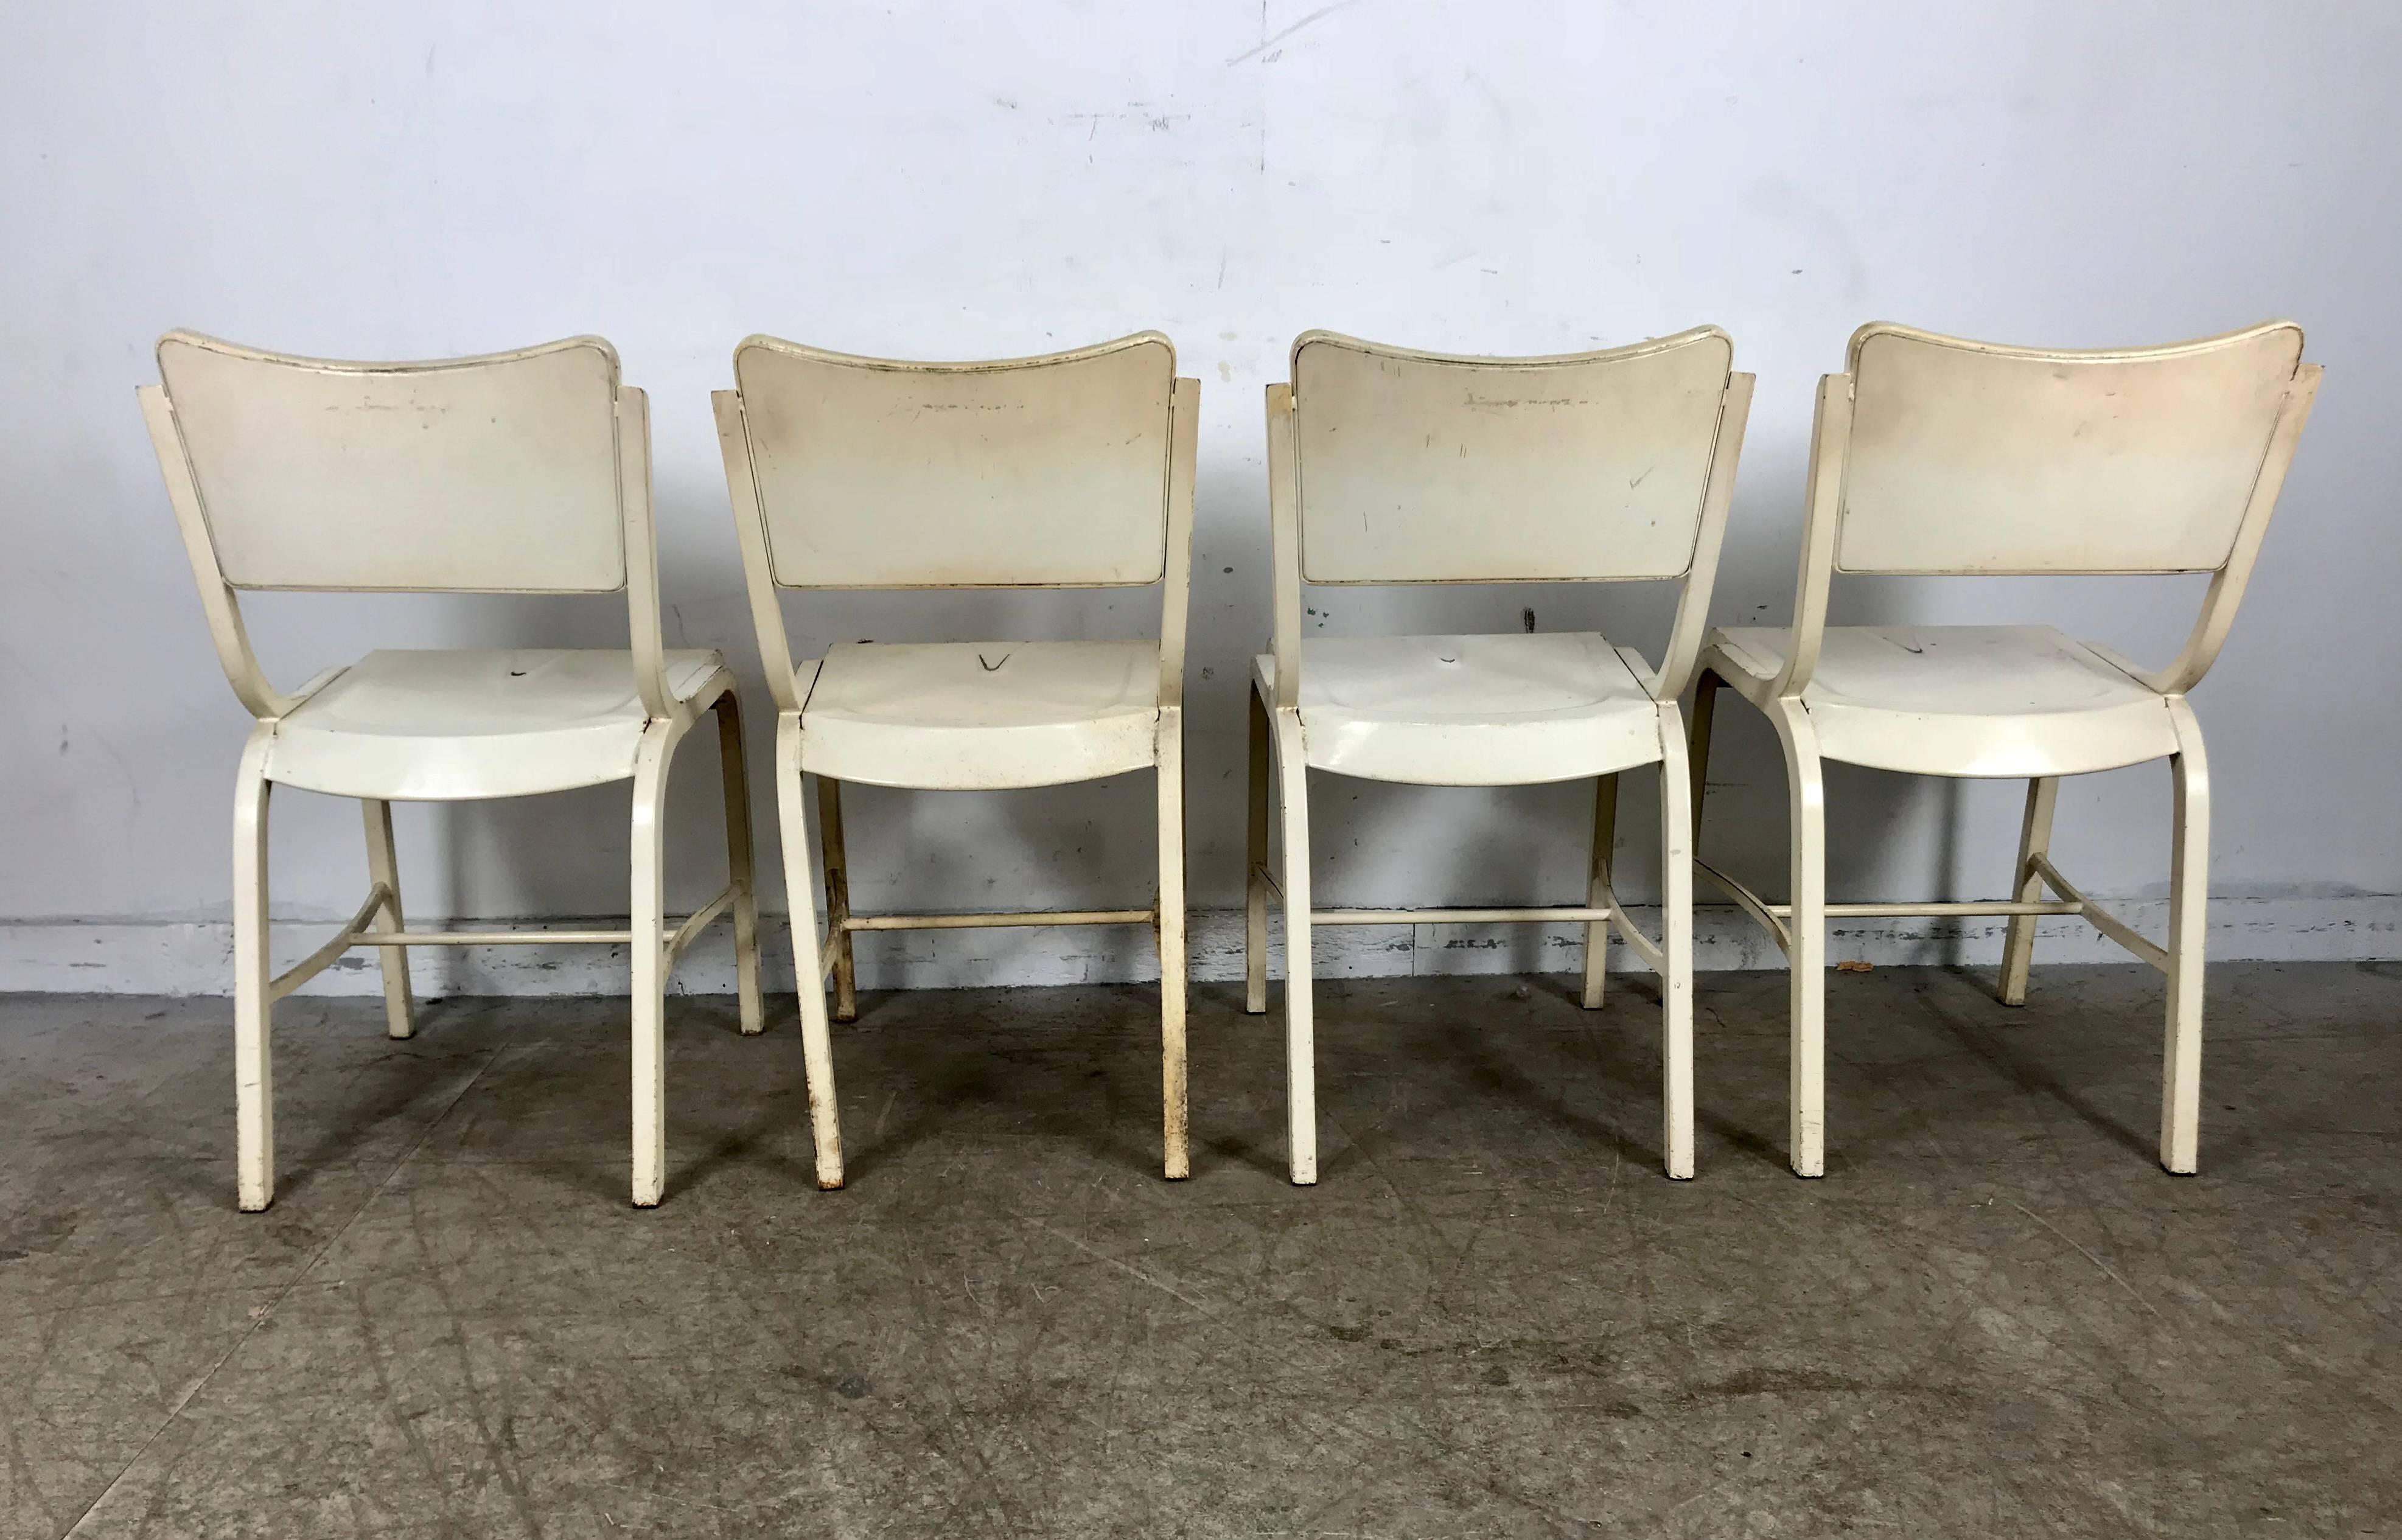 Painted Set of Four Metal Industrial Side Chairs Manufactured by Doehler Metal Furn Co